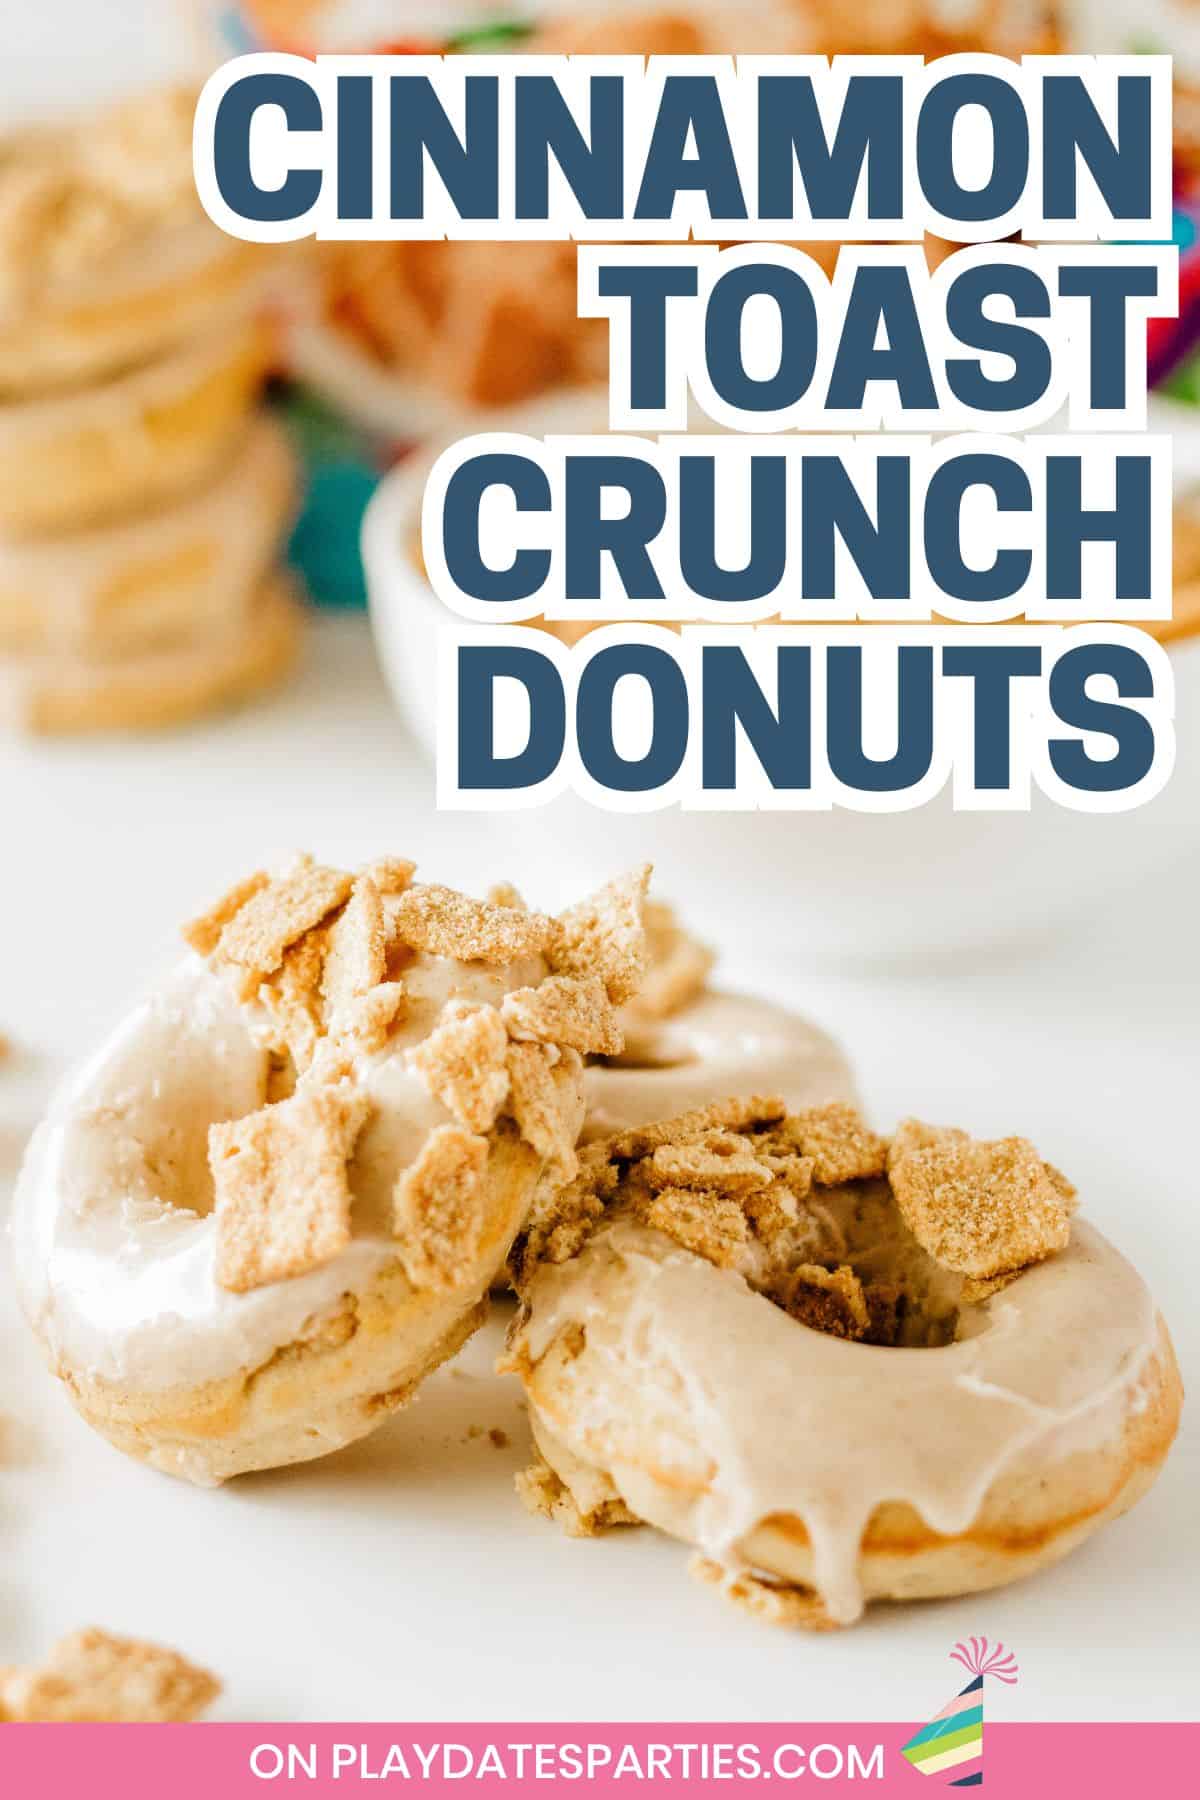 Cinnamon Toast Crunch Cereal Donuts Pin Image.